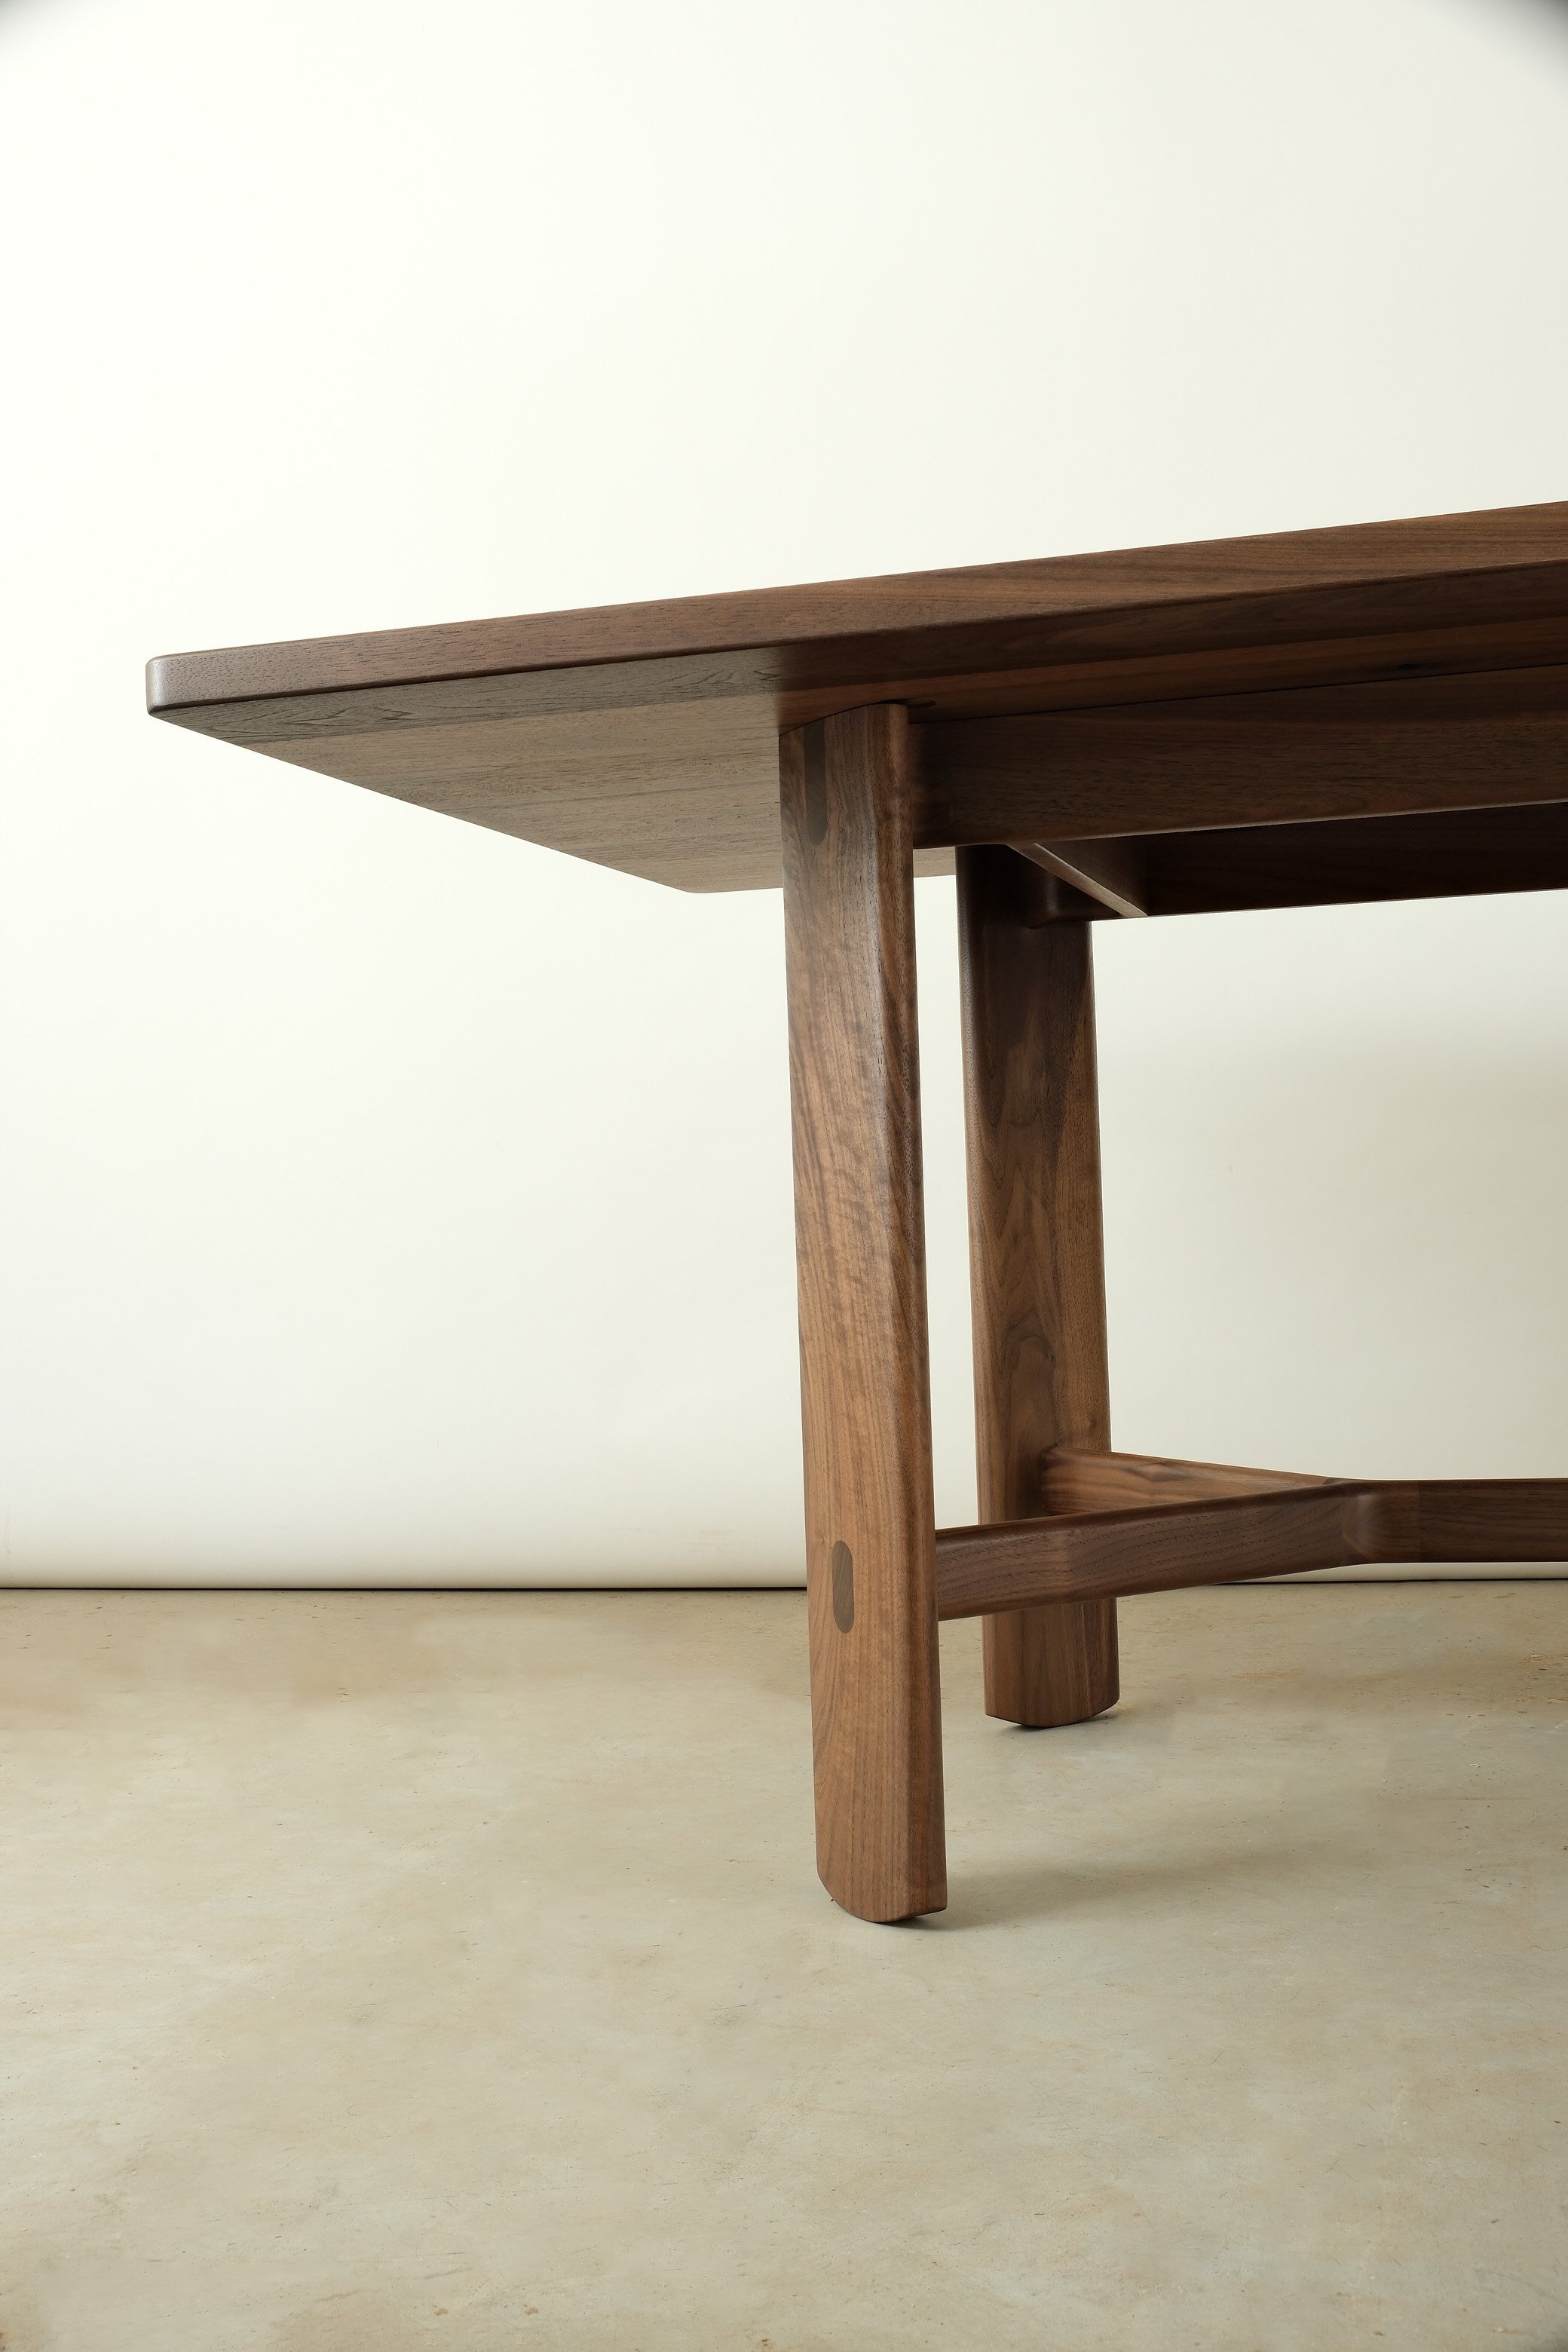 ghent dining table 3:4 low angle.JPG